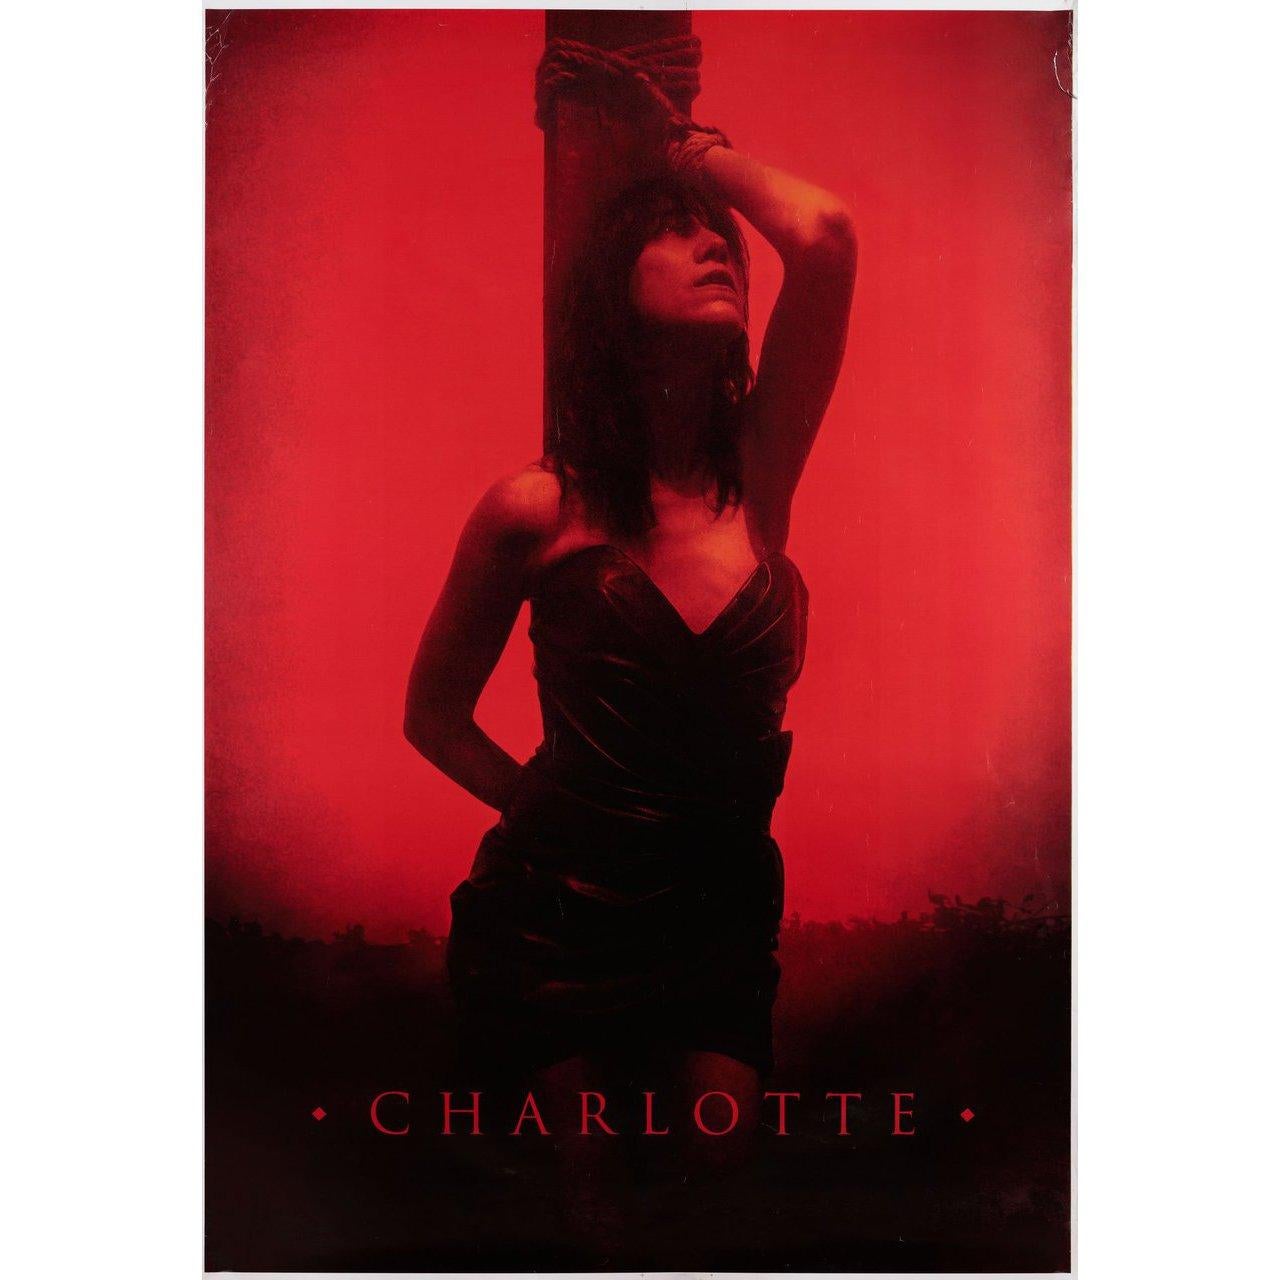 Original 2022 French grande poster for the 2019 film Lux AEterna directed by Gaspar Noe with Beatrice Dalle / Charlotte Gainsbourg / Abbey Lee. Very Good condition, rolled w/ wrinkling and tear top right. Please note: the size is stated in inches